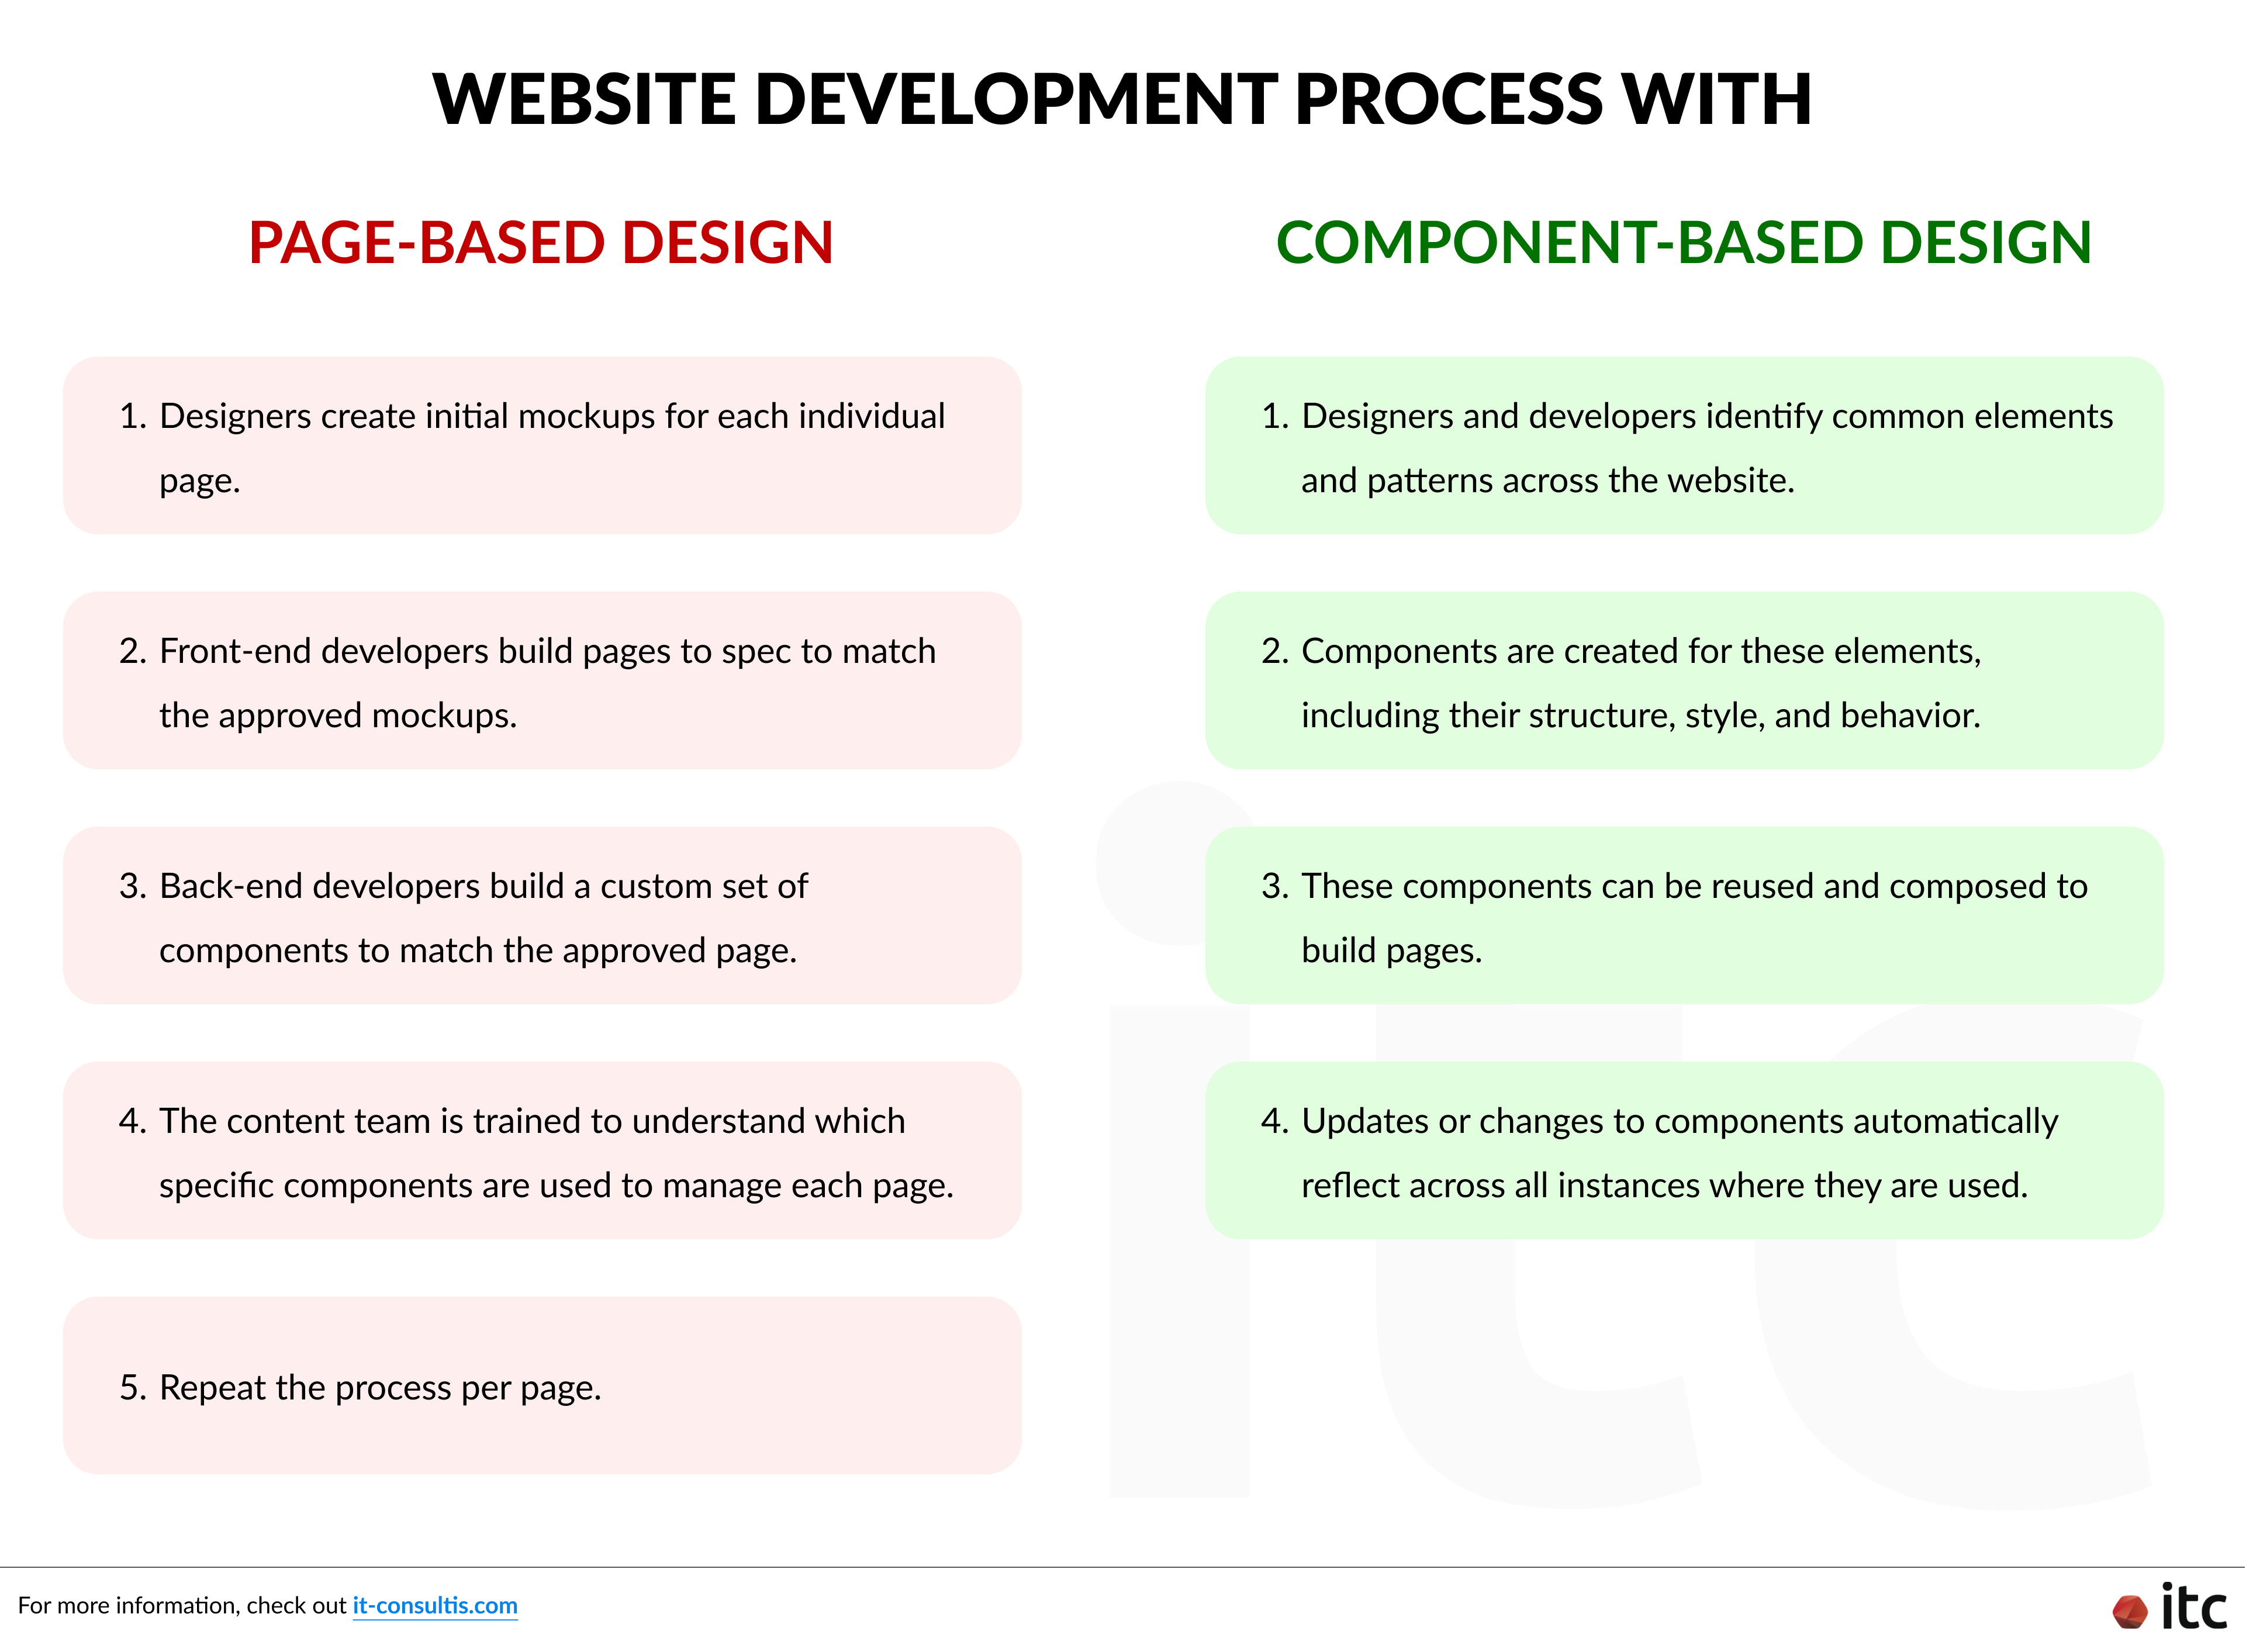 Breakdown of web development with page-based design vs component-based design process